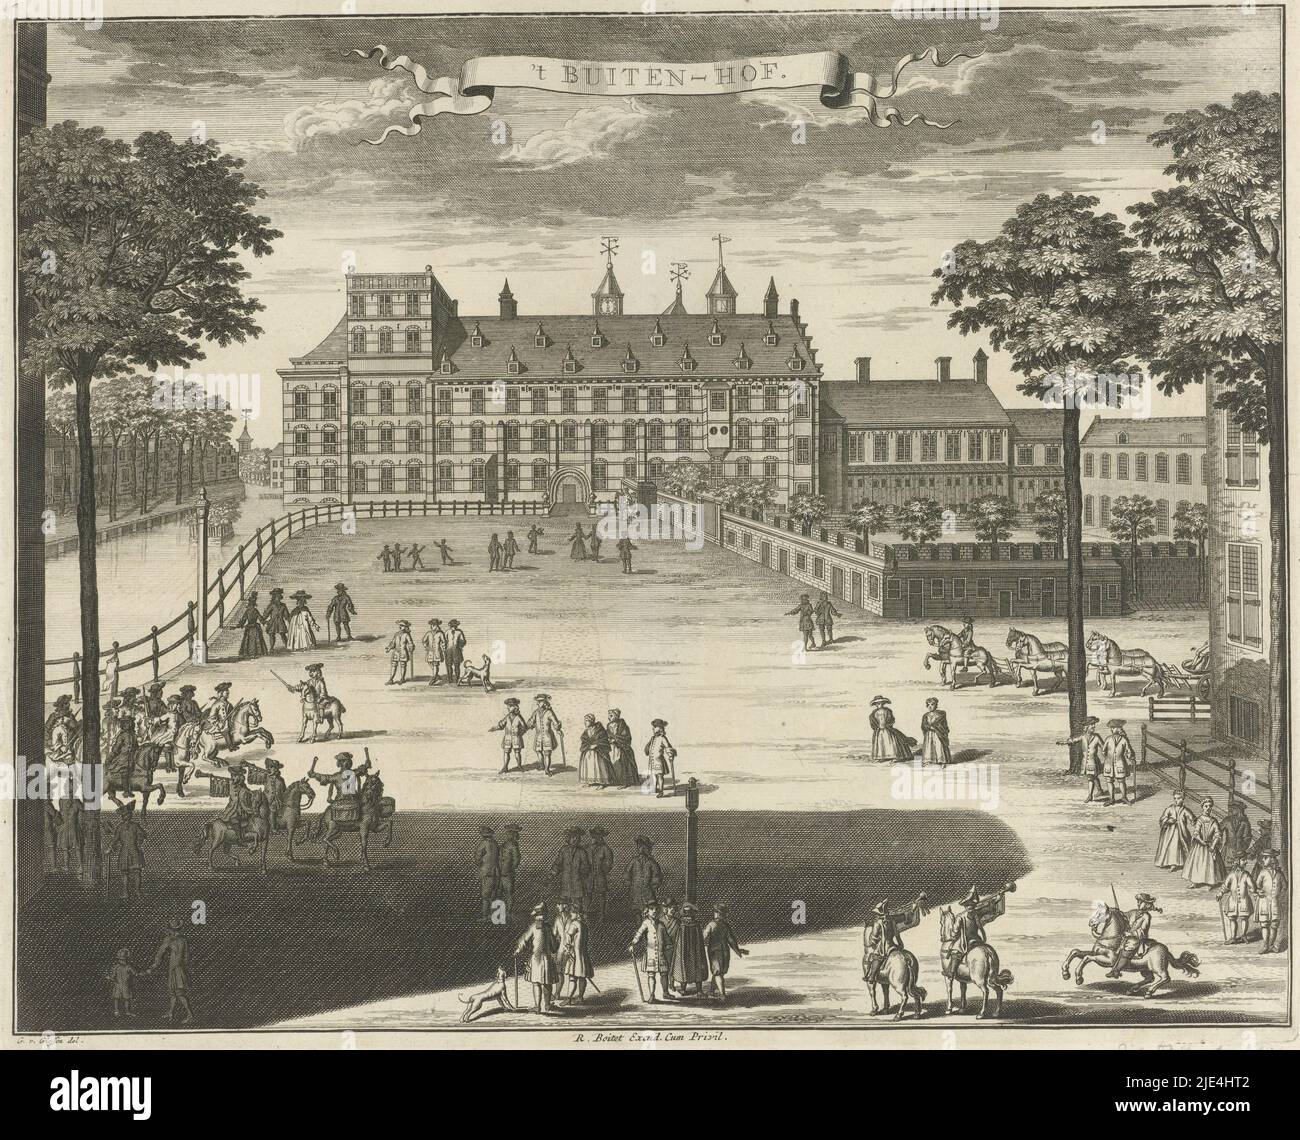 View of the Buitenhof in The Hague, anonymous, after Gerrit van Giessen, 1730 - 1736, View of the Buitenhof in The Hague, with the Binnenhof in the background. At the Buitenhof several figures and horsemen., print maker: anonymous, intermediary draughtsman: Gerrit van Giessen, (mentioned on object), publisher: Reinier Boitet, (mentioned on object), intermediary draughtsman: The Hague, publisher: Delft, publisher: Amsterdam, 1730 - 1736, paper, etching, engraving, h 284 mm × w 348 mm Stock Photo